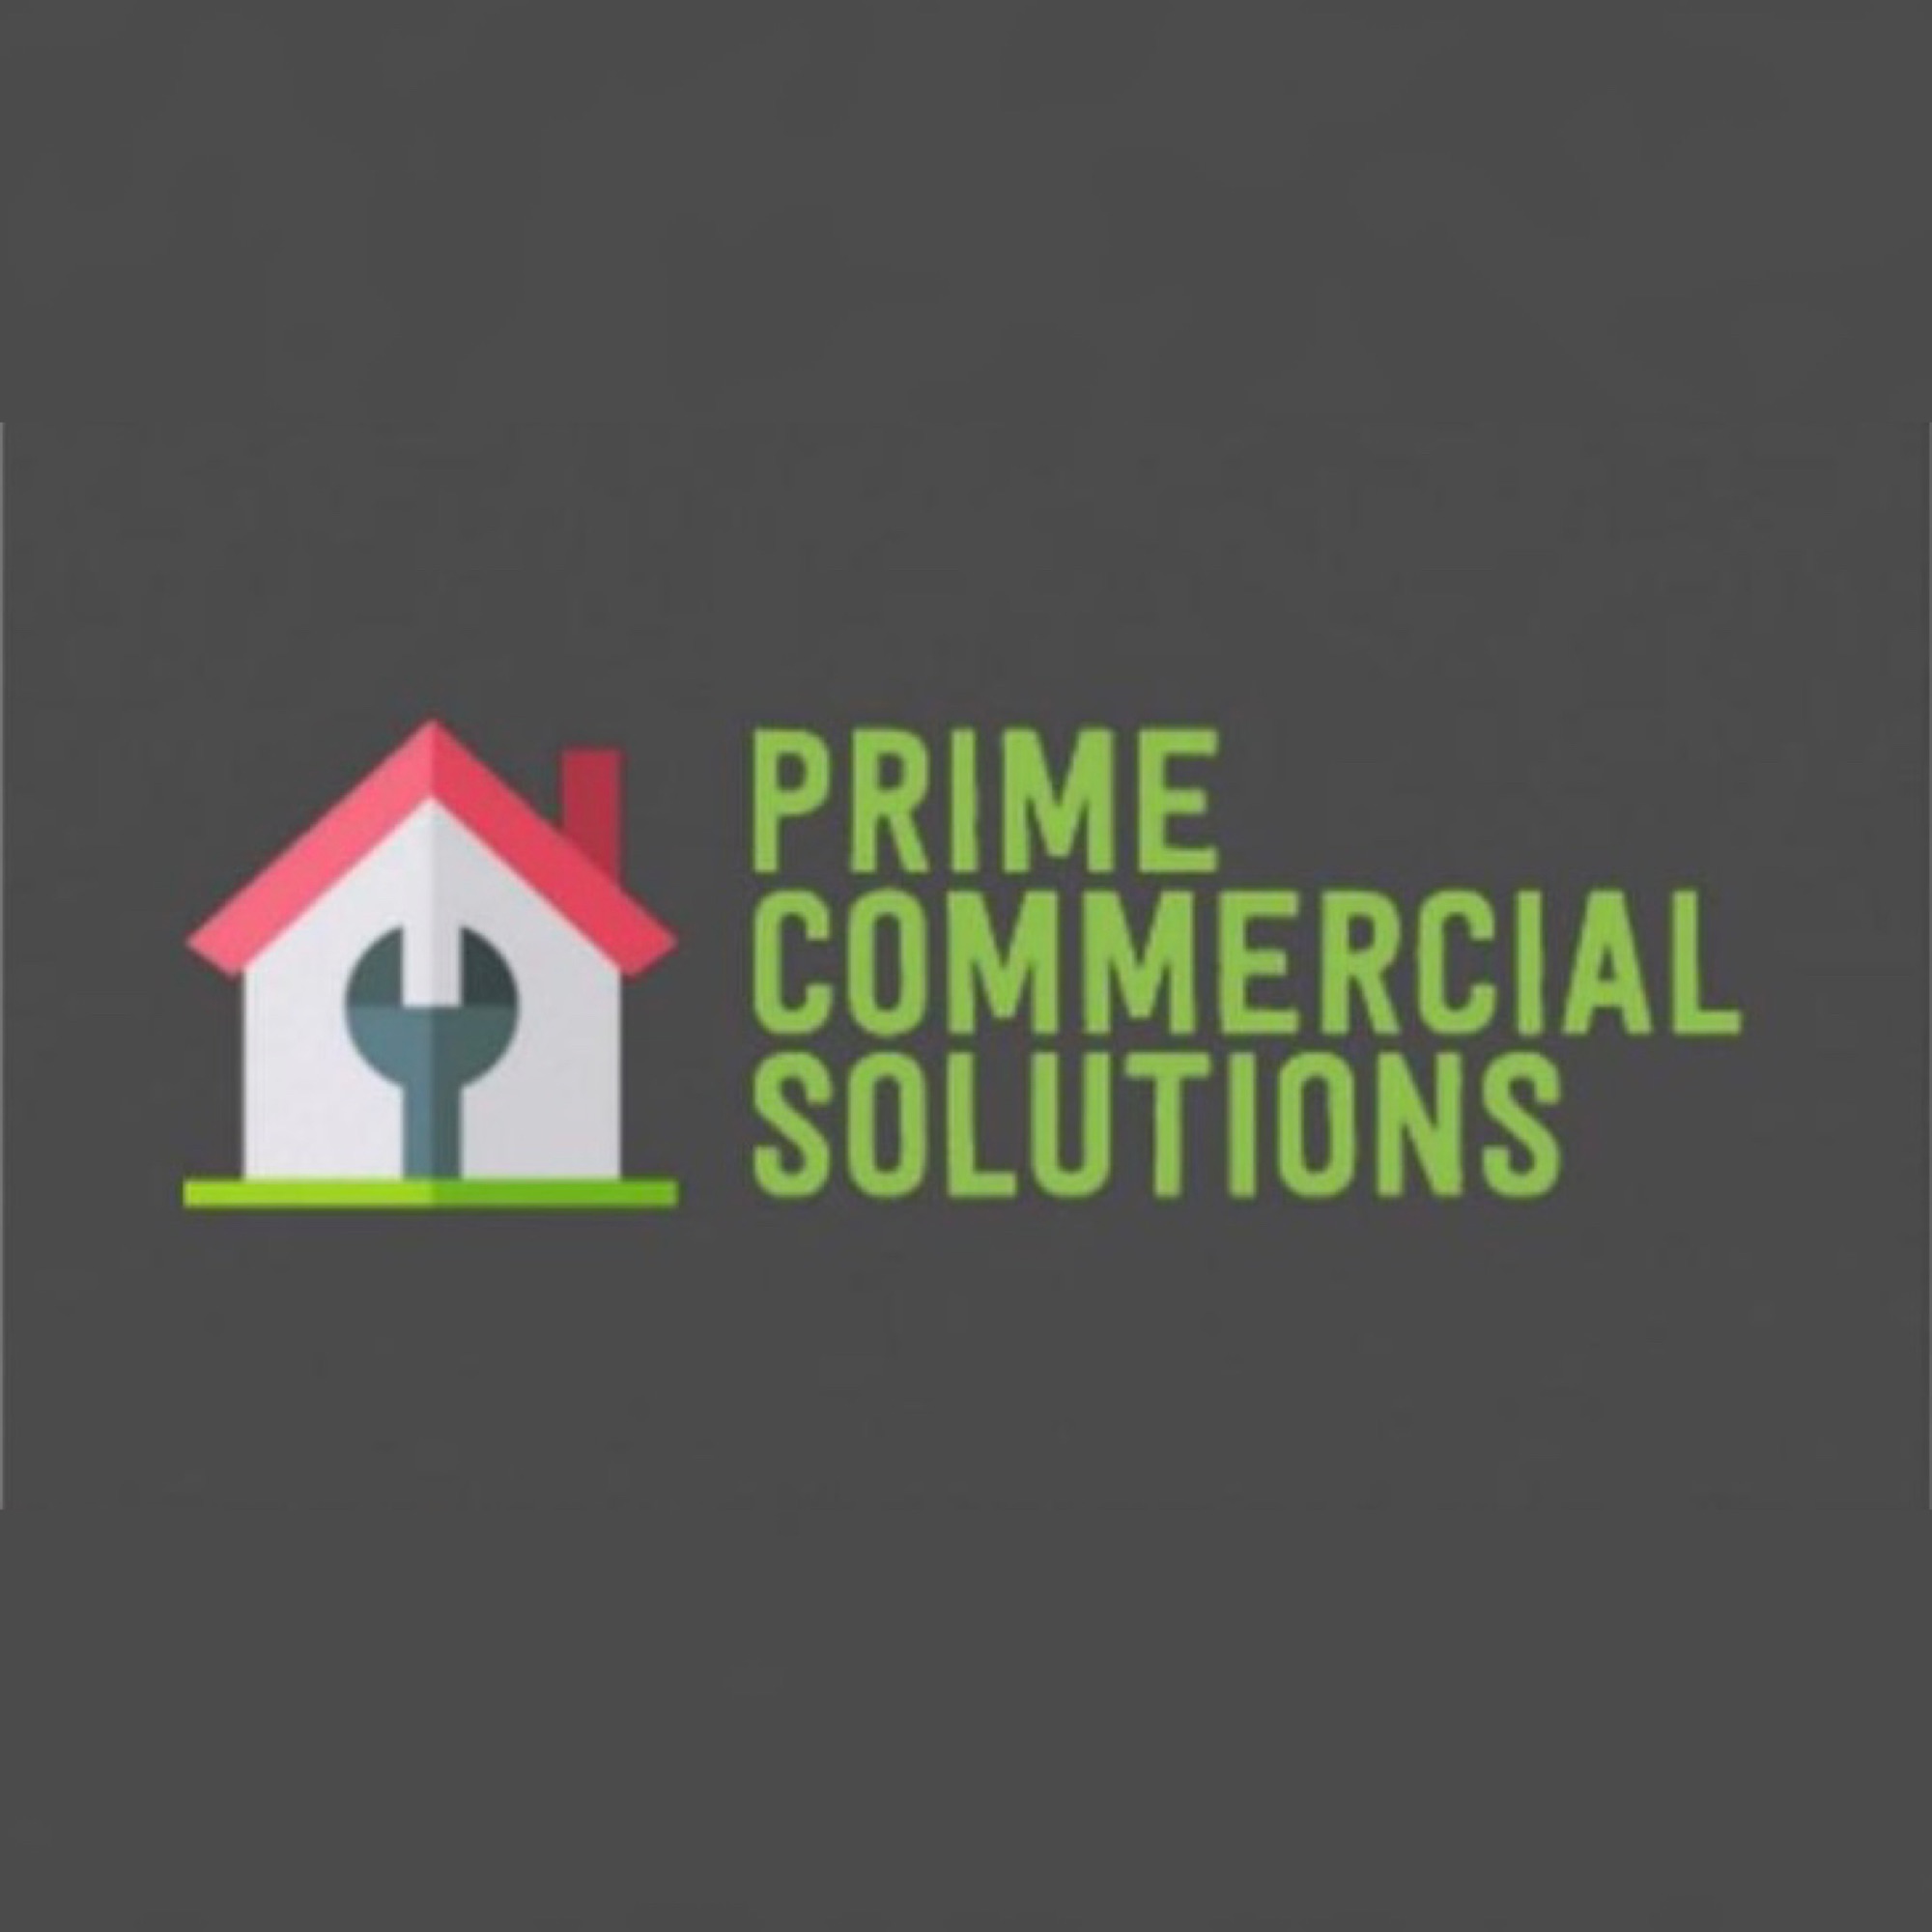 Prime Commercial Solutions Logo